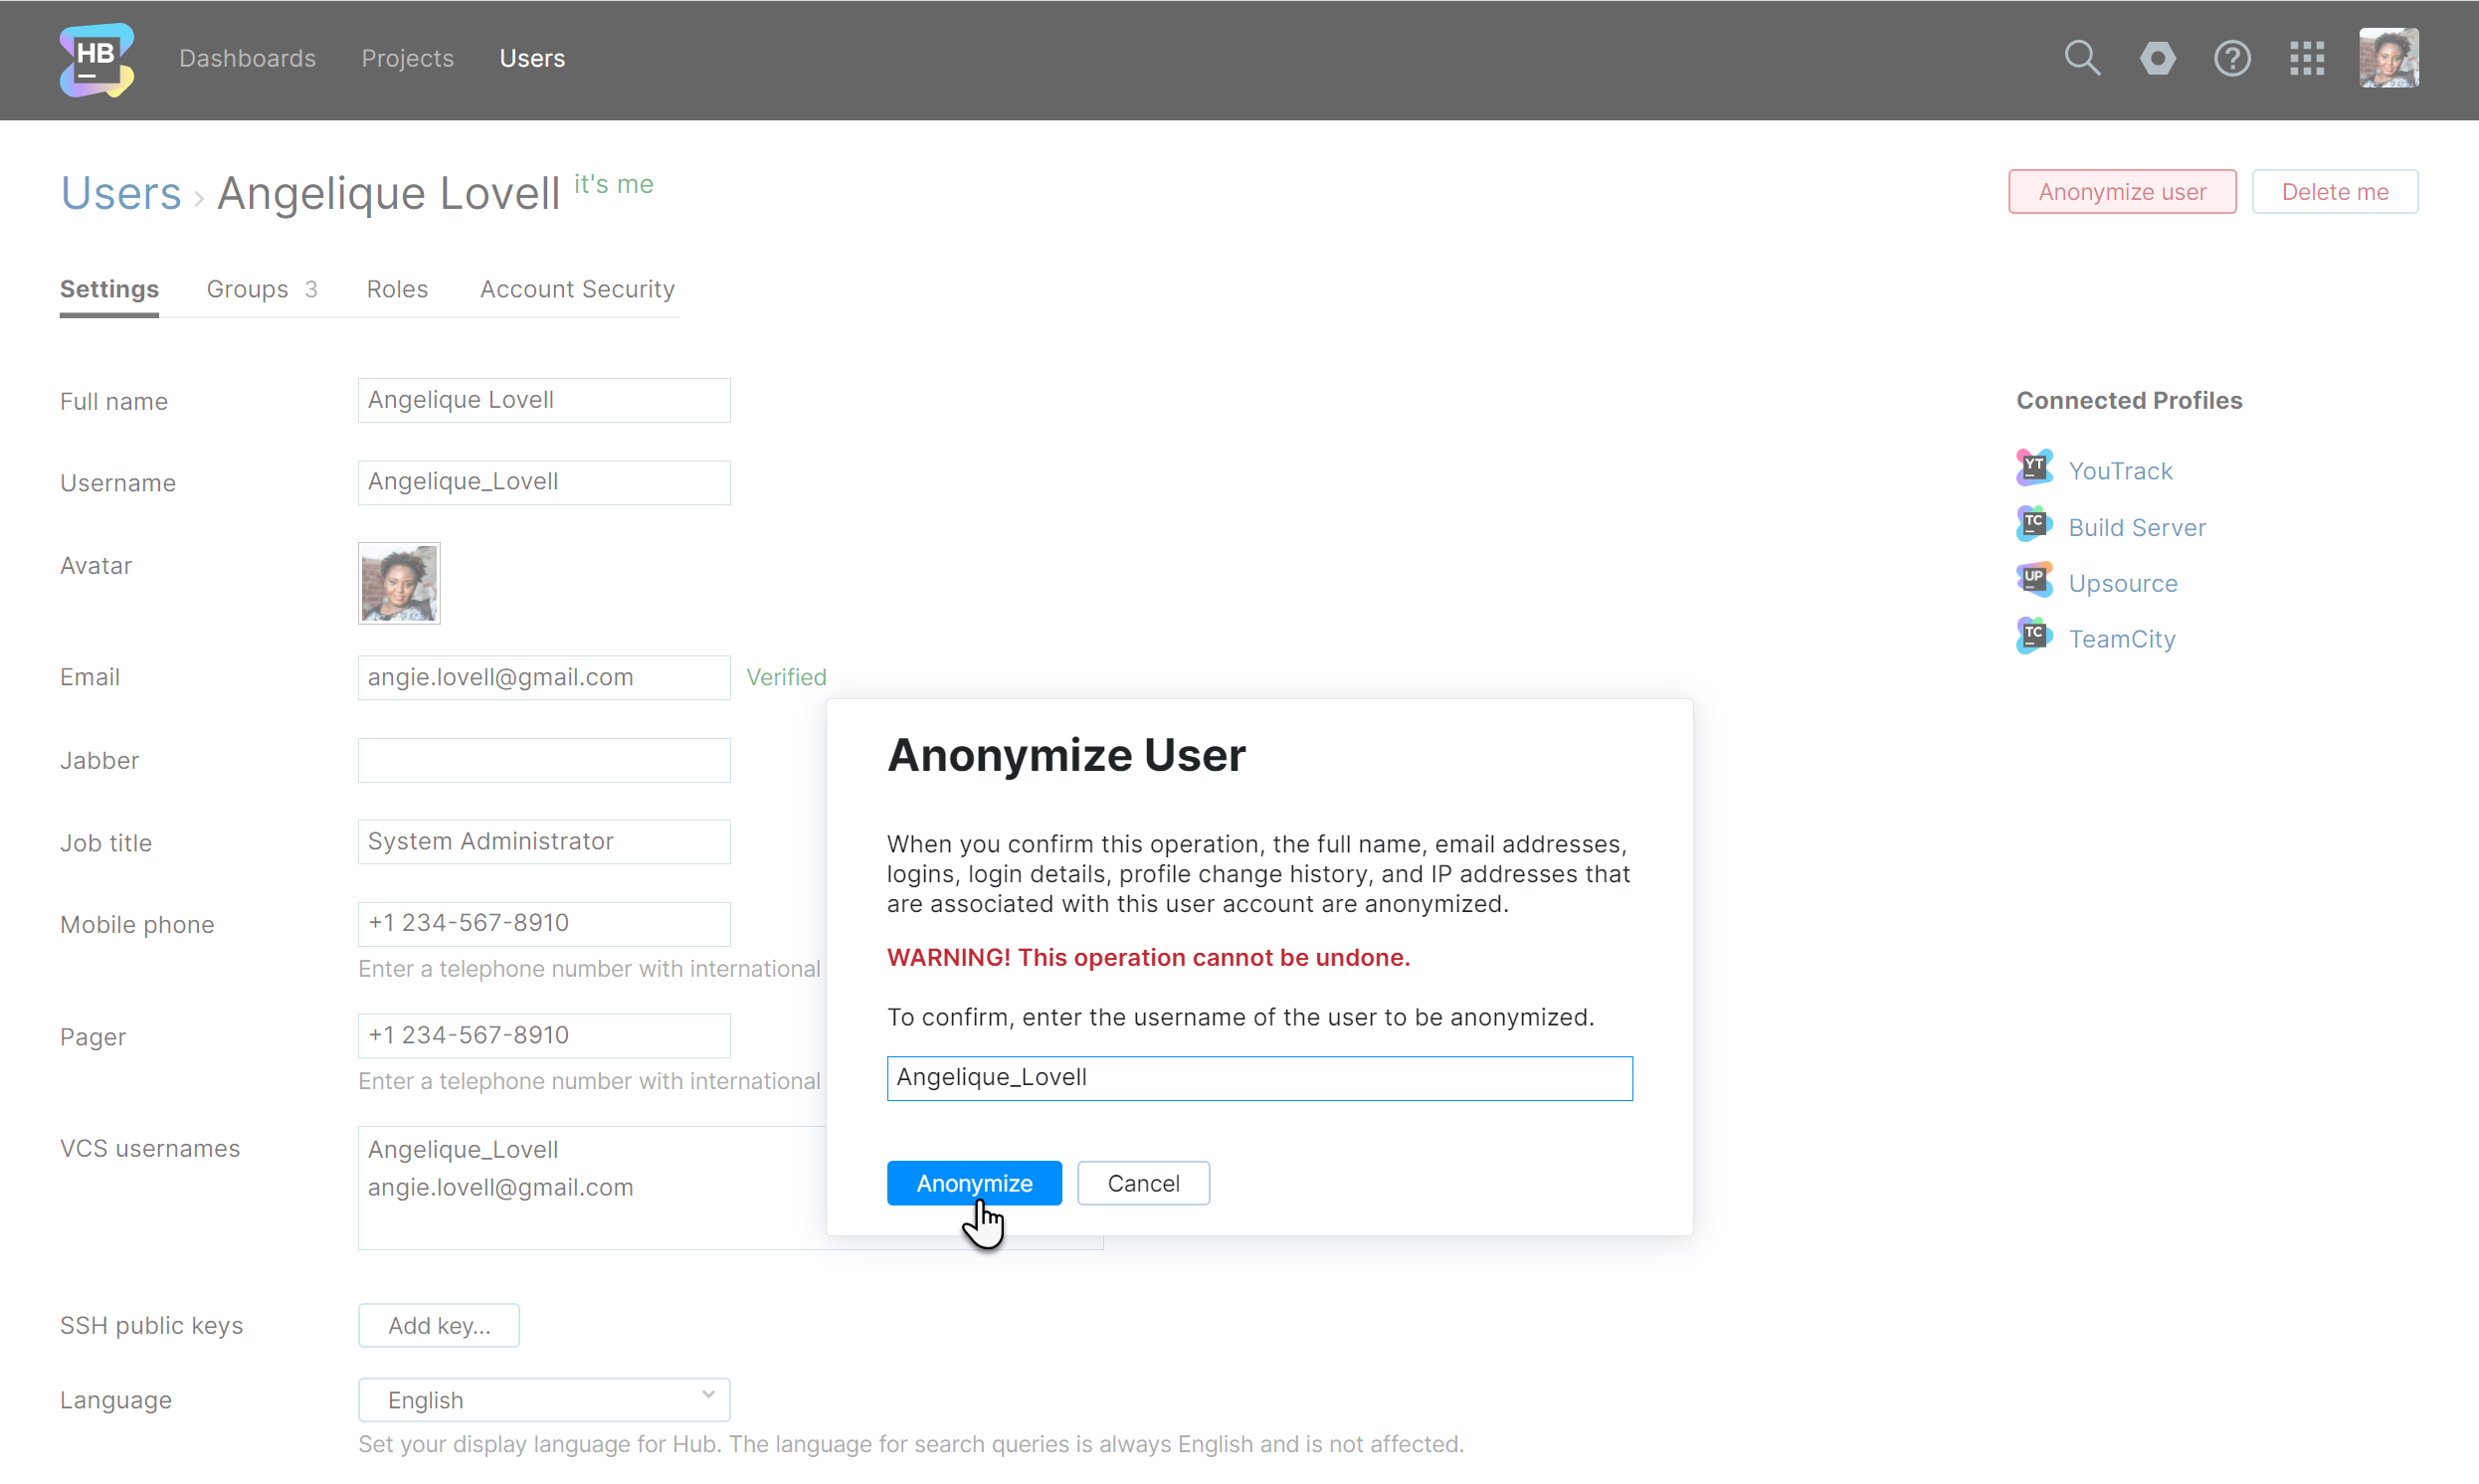 Anonymize user confirmation dialog